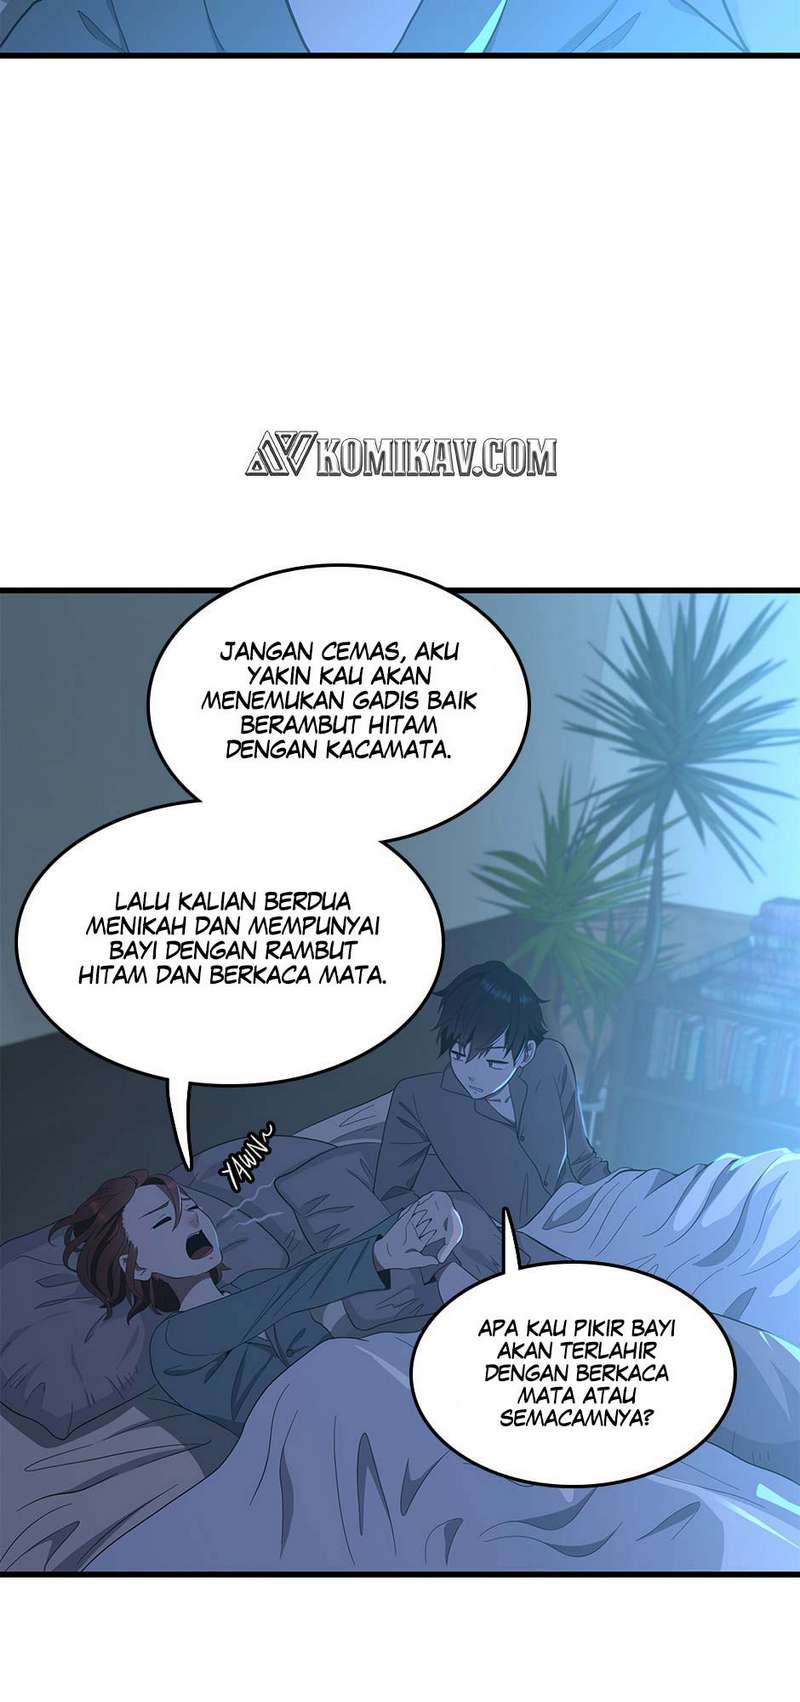 The Beginning After the End Chapter 76